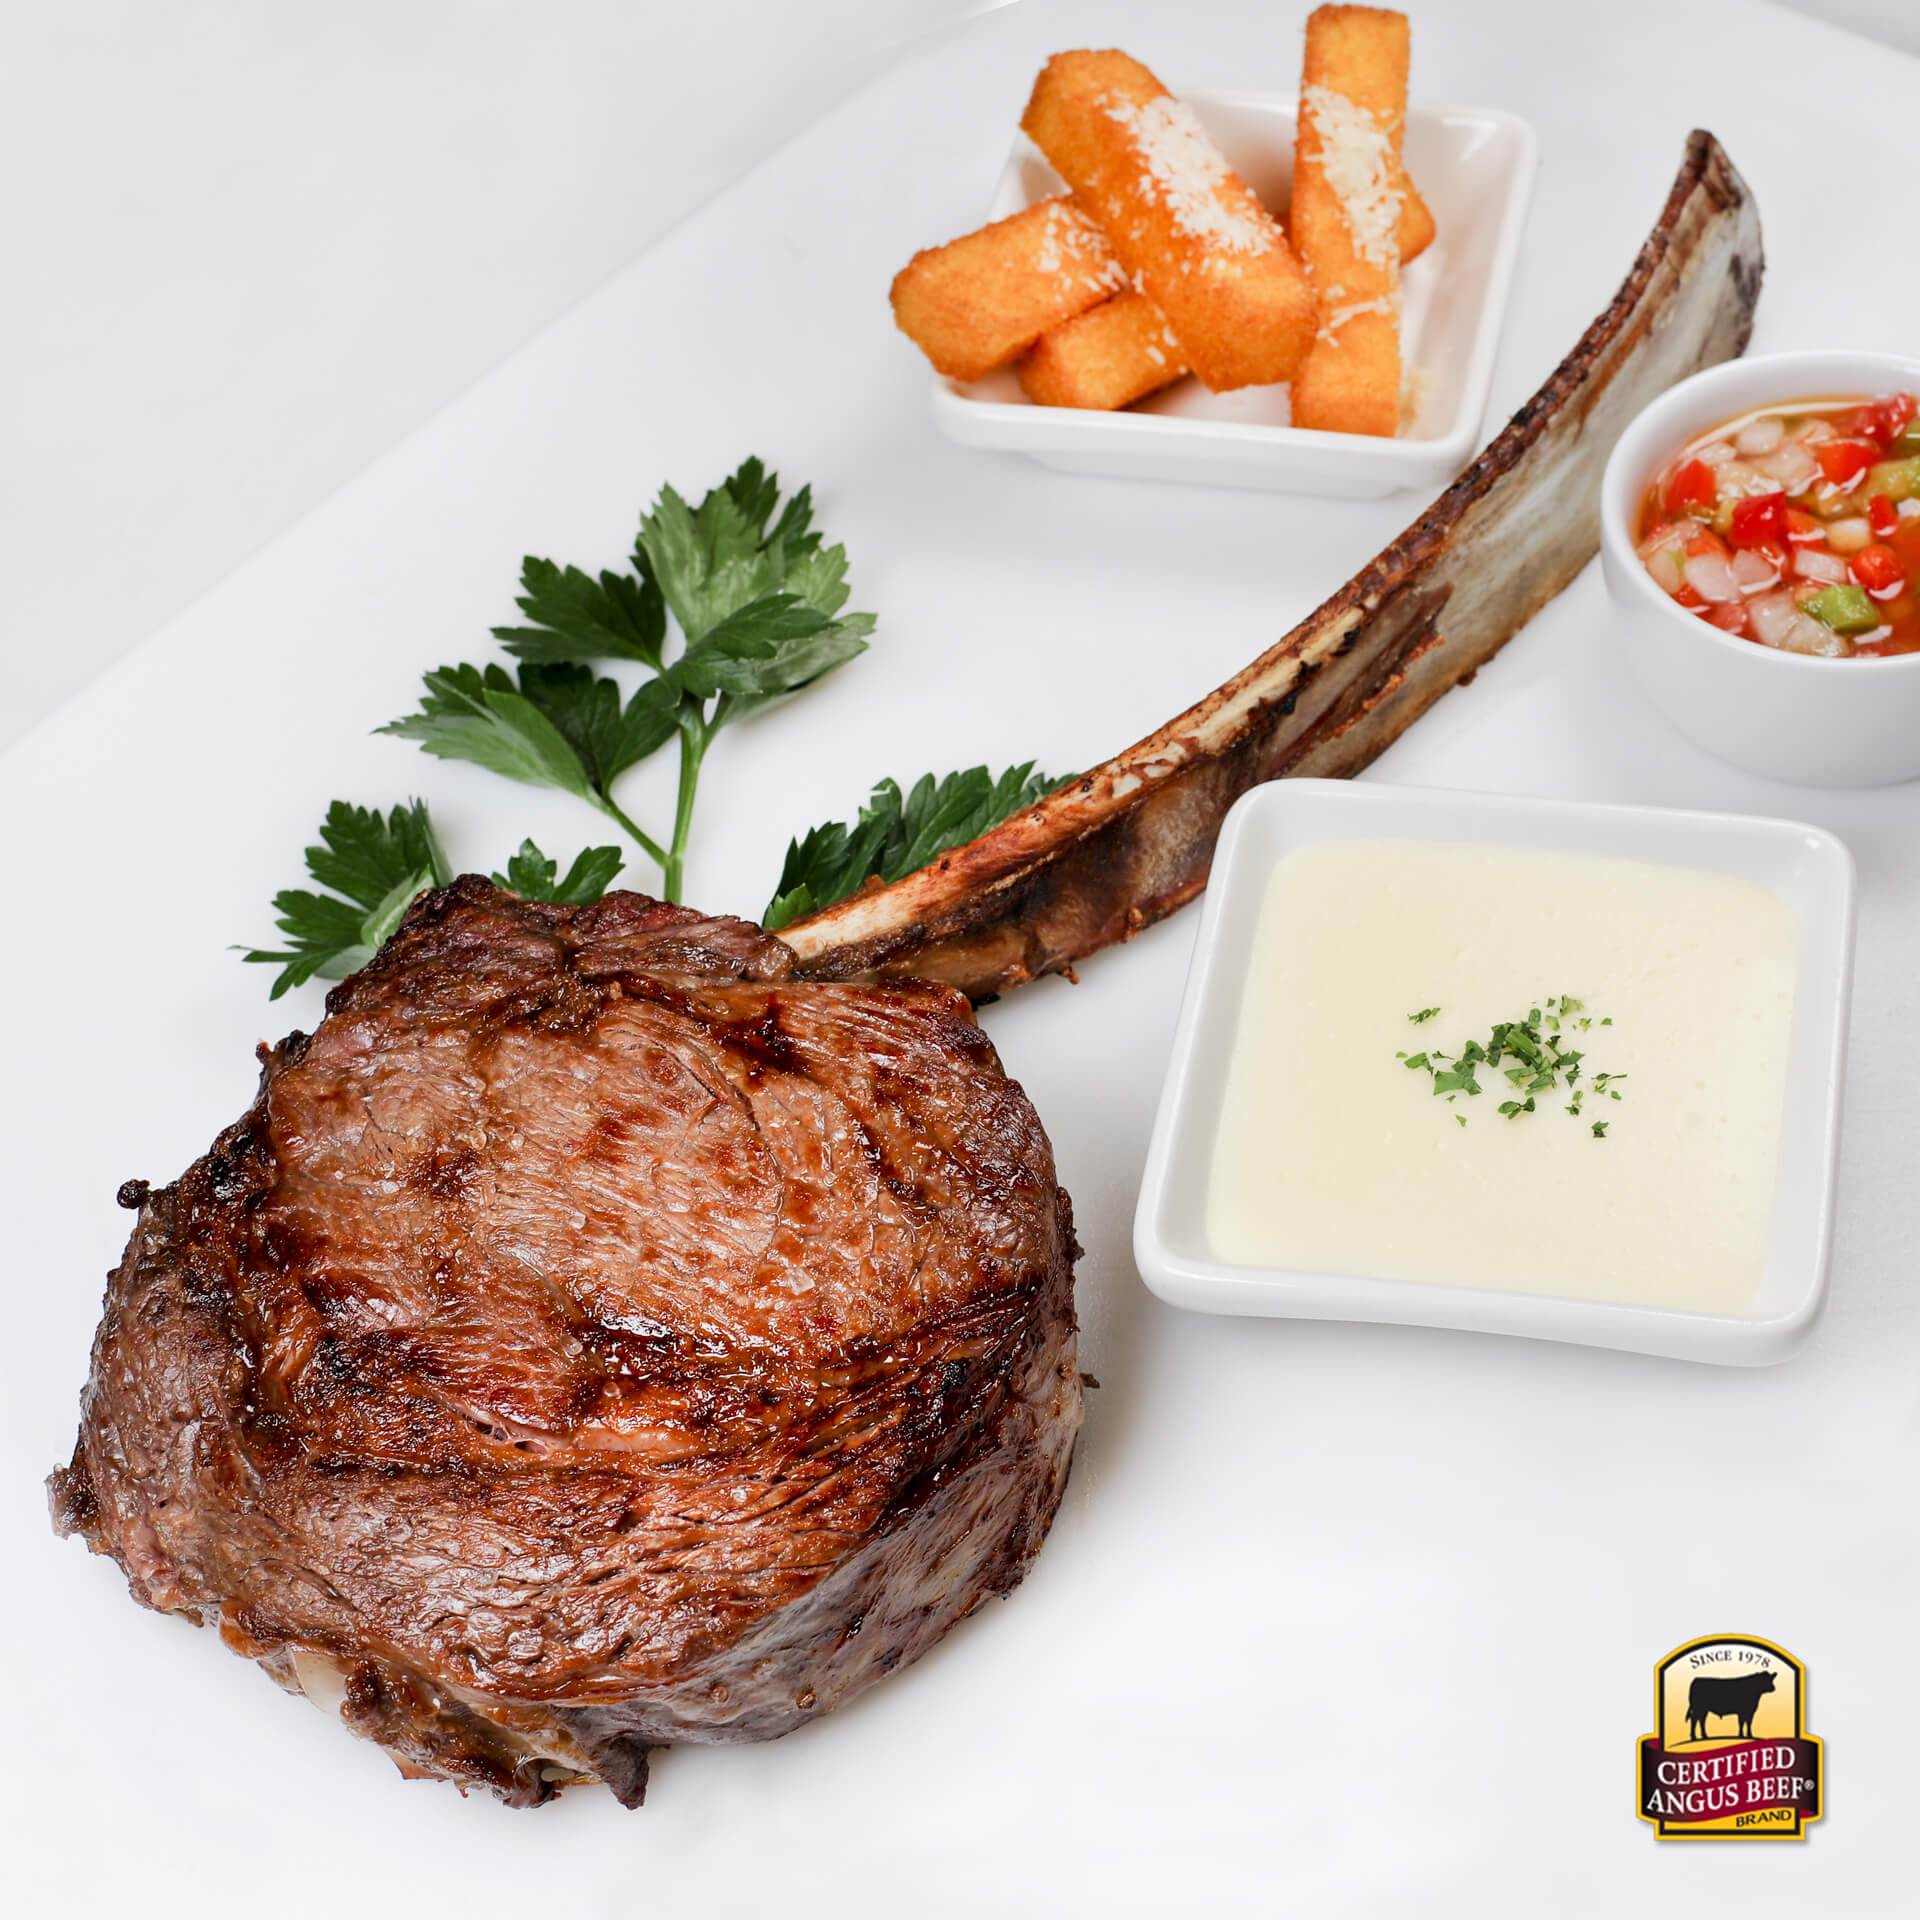 Tomahawk Tuesday at Chima: Giving You Something to Rave About!